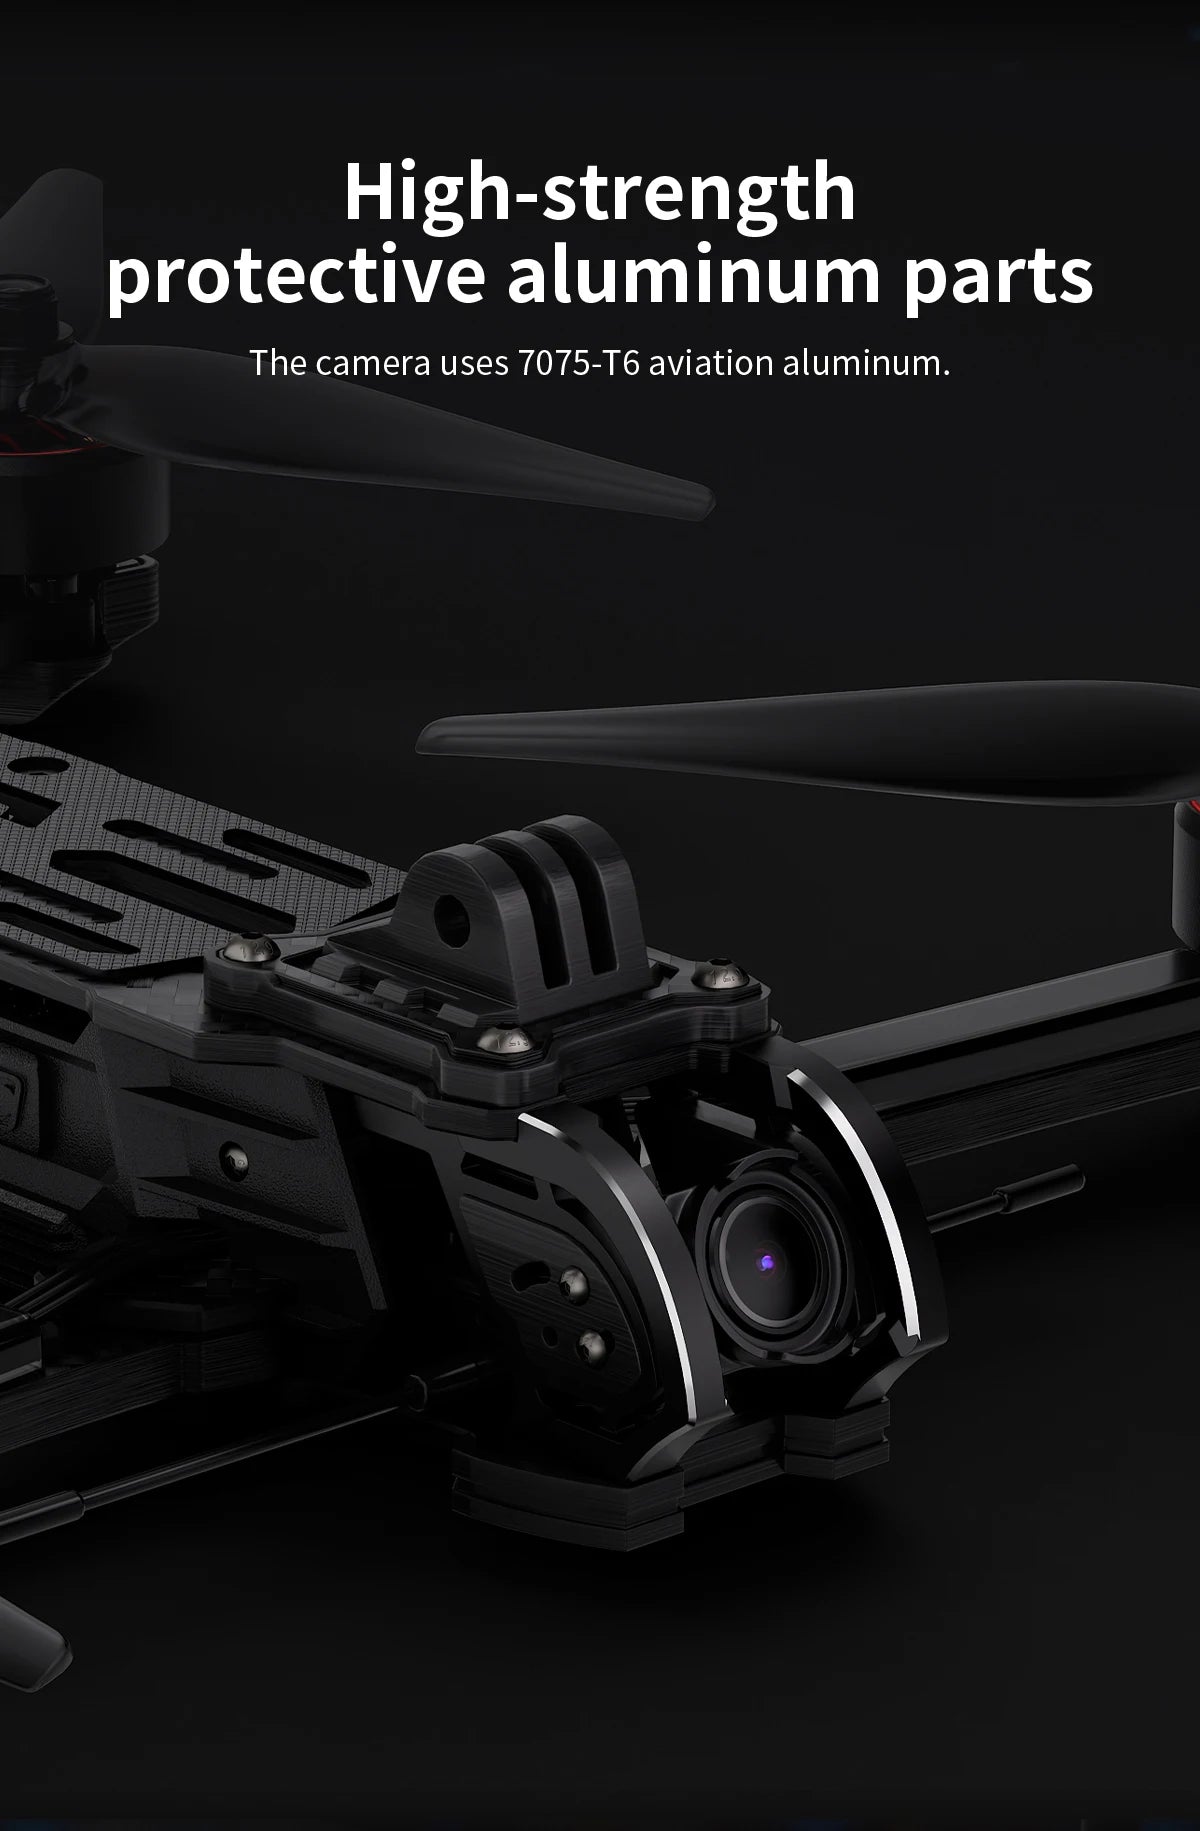 GEPRC MOZ7 HD, high-strength protective aluminum parts The camera uses 7075-T6 aviation aluminum